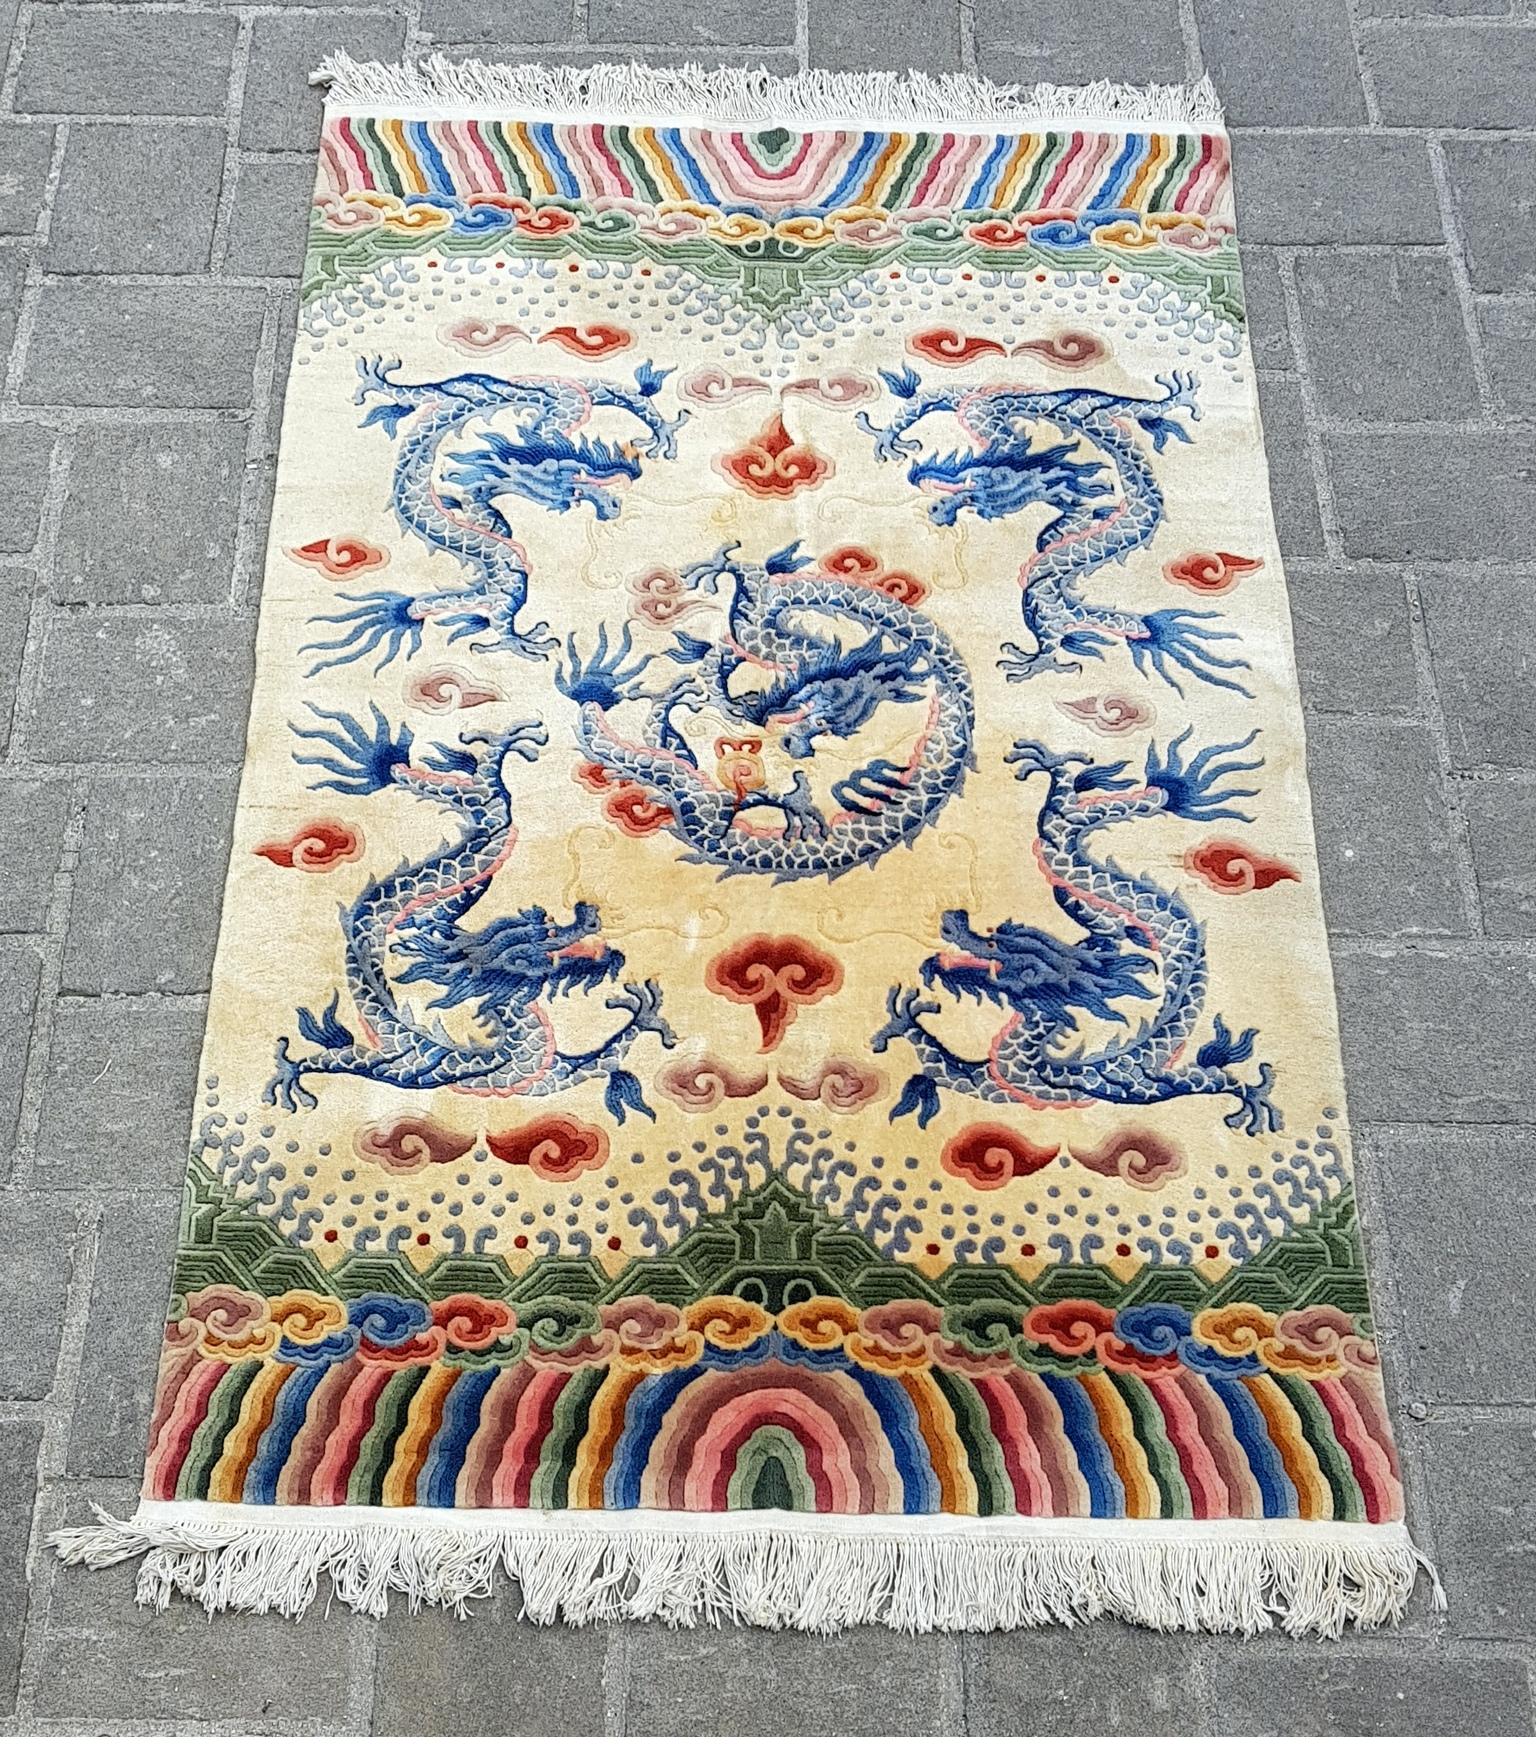 This colorful and vibrant Chinese rug depicts five dragons in blue against an ivory colored base surrounded by clouds in red, pink and purple colors.
At the centre of this piece is a powerful dragon playing with the burning pearl, surrounded by